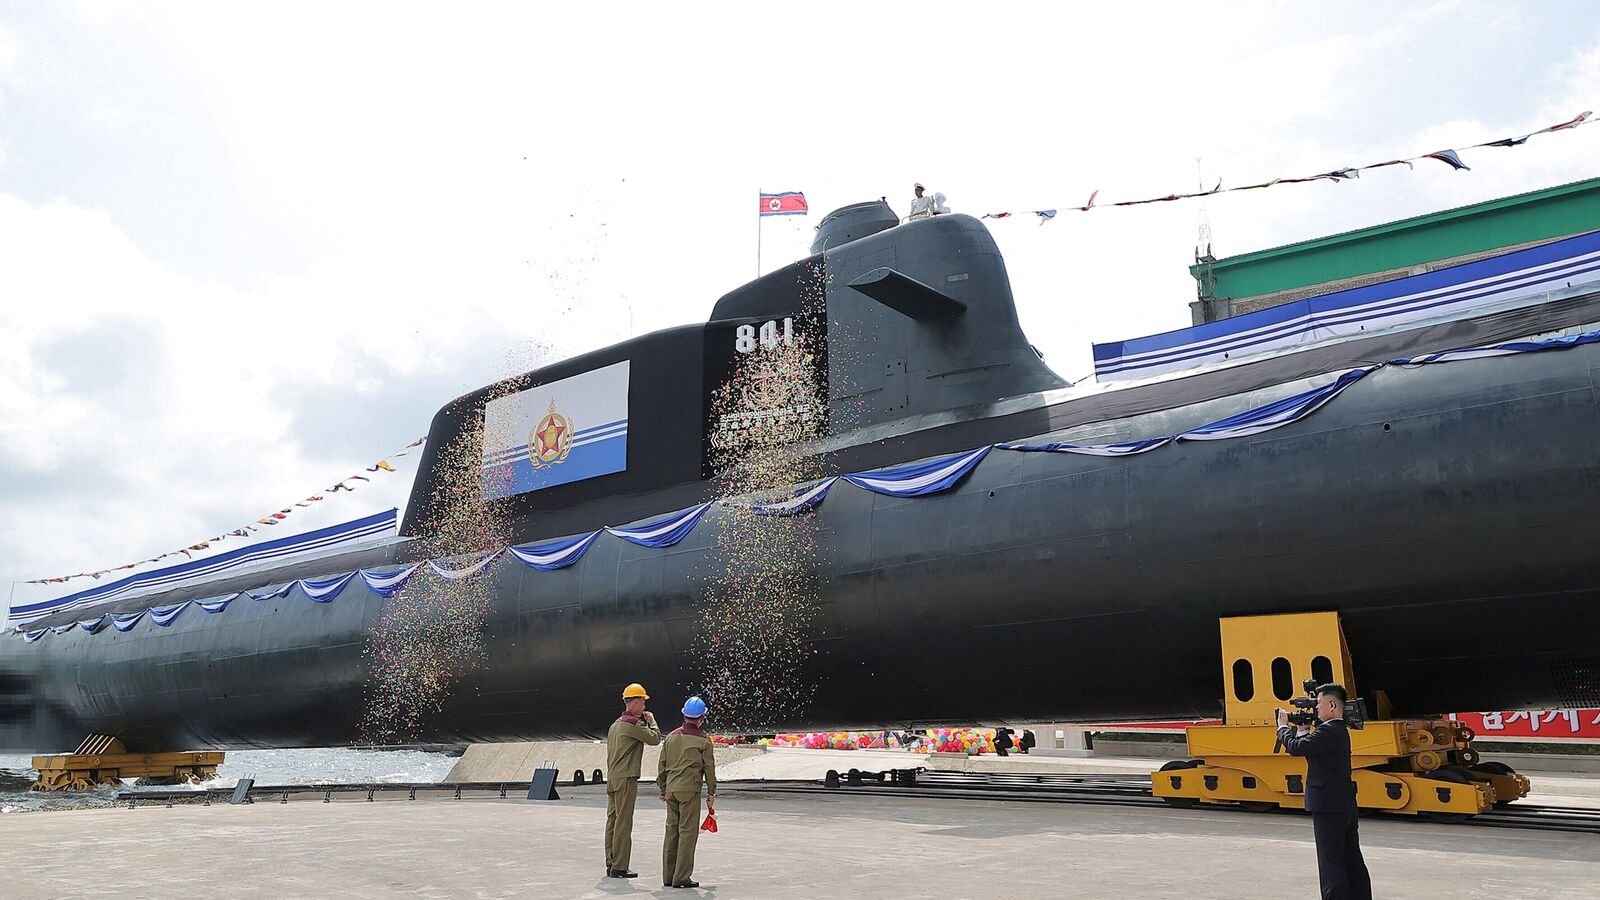 North Korea Launches Nuclear Sub That Carries 10 Nuclear Missiles